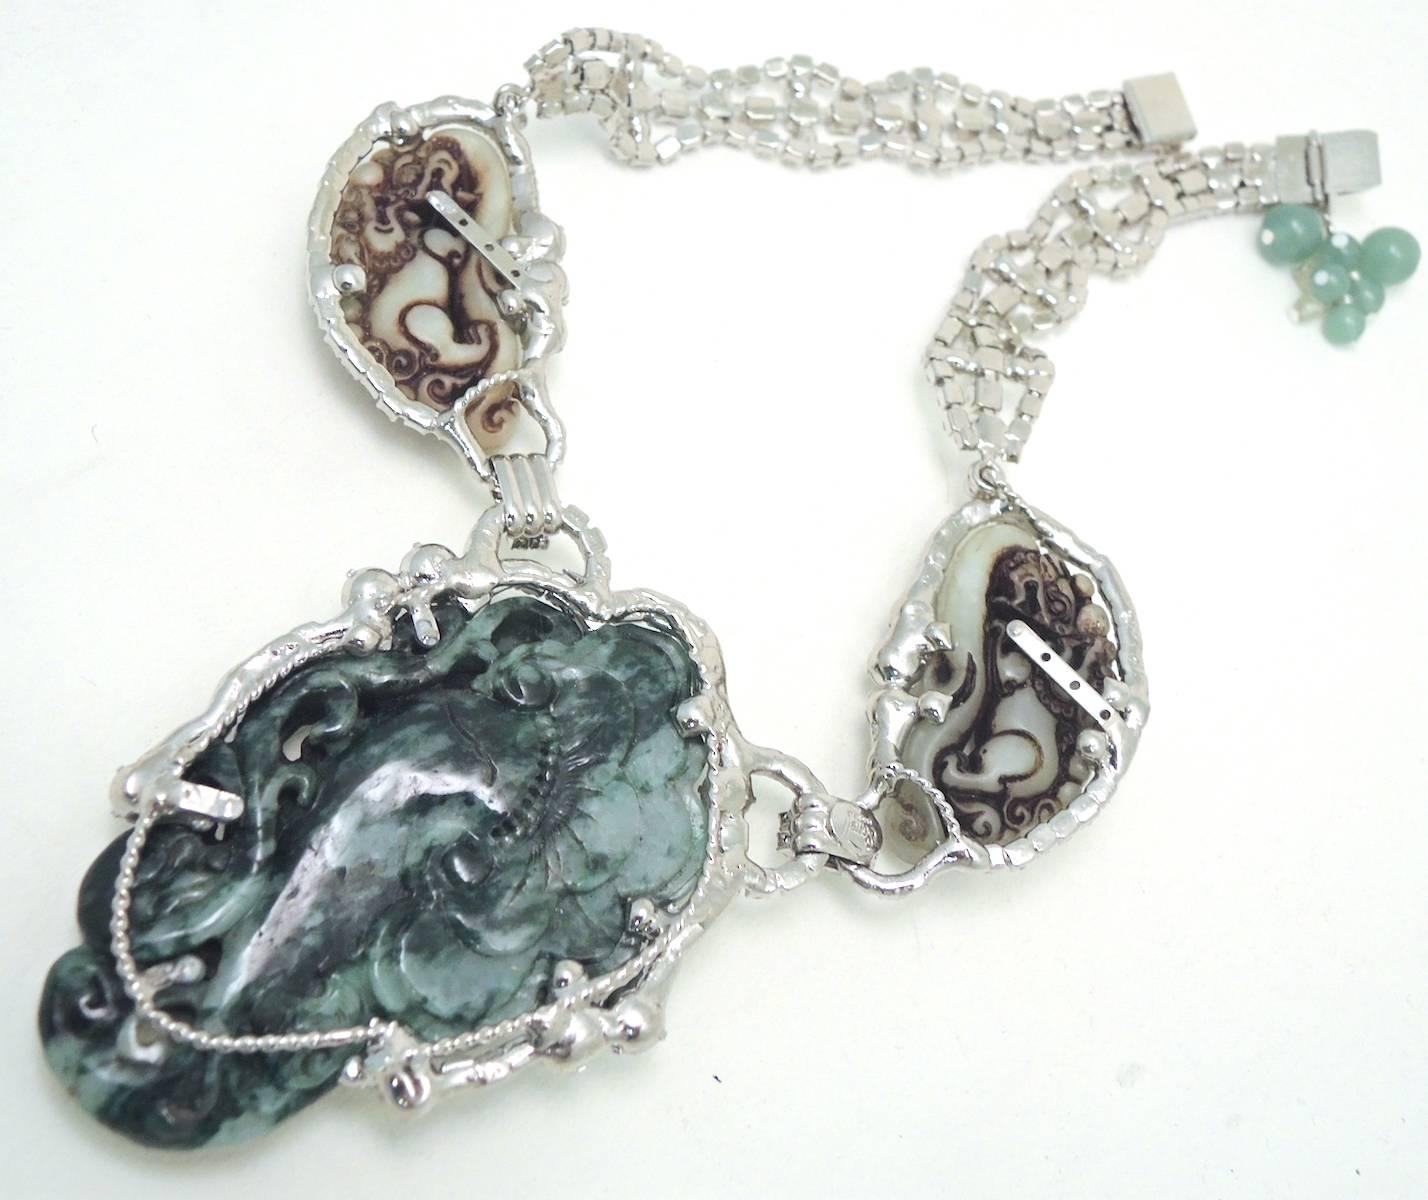 This is a Robert Sorrell “one of a kind” masterpiece.  The necklace features a large, heavily carved faux jade center & side-pieces that are framed by vibrant clear crystals. The centerpiece measures 3-1/2” x 2-1/2”.  The sides pieces on each side